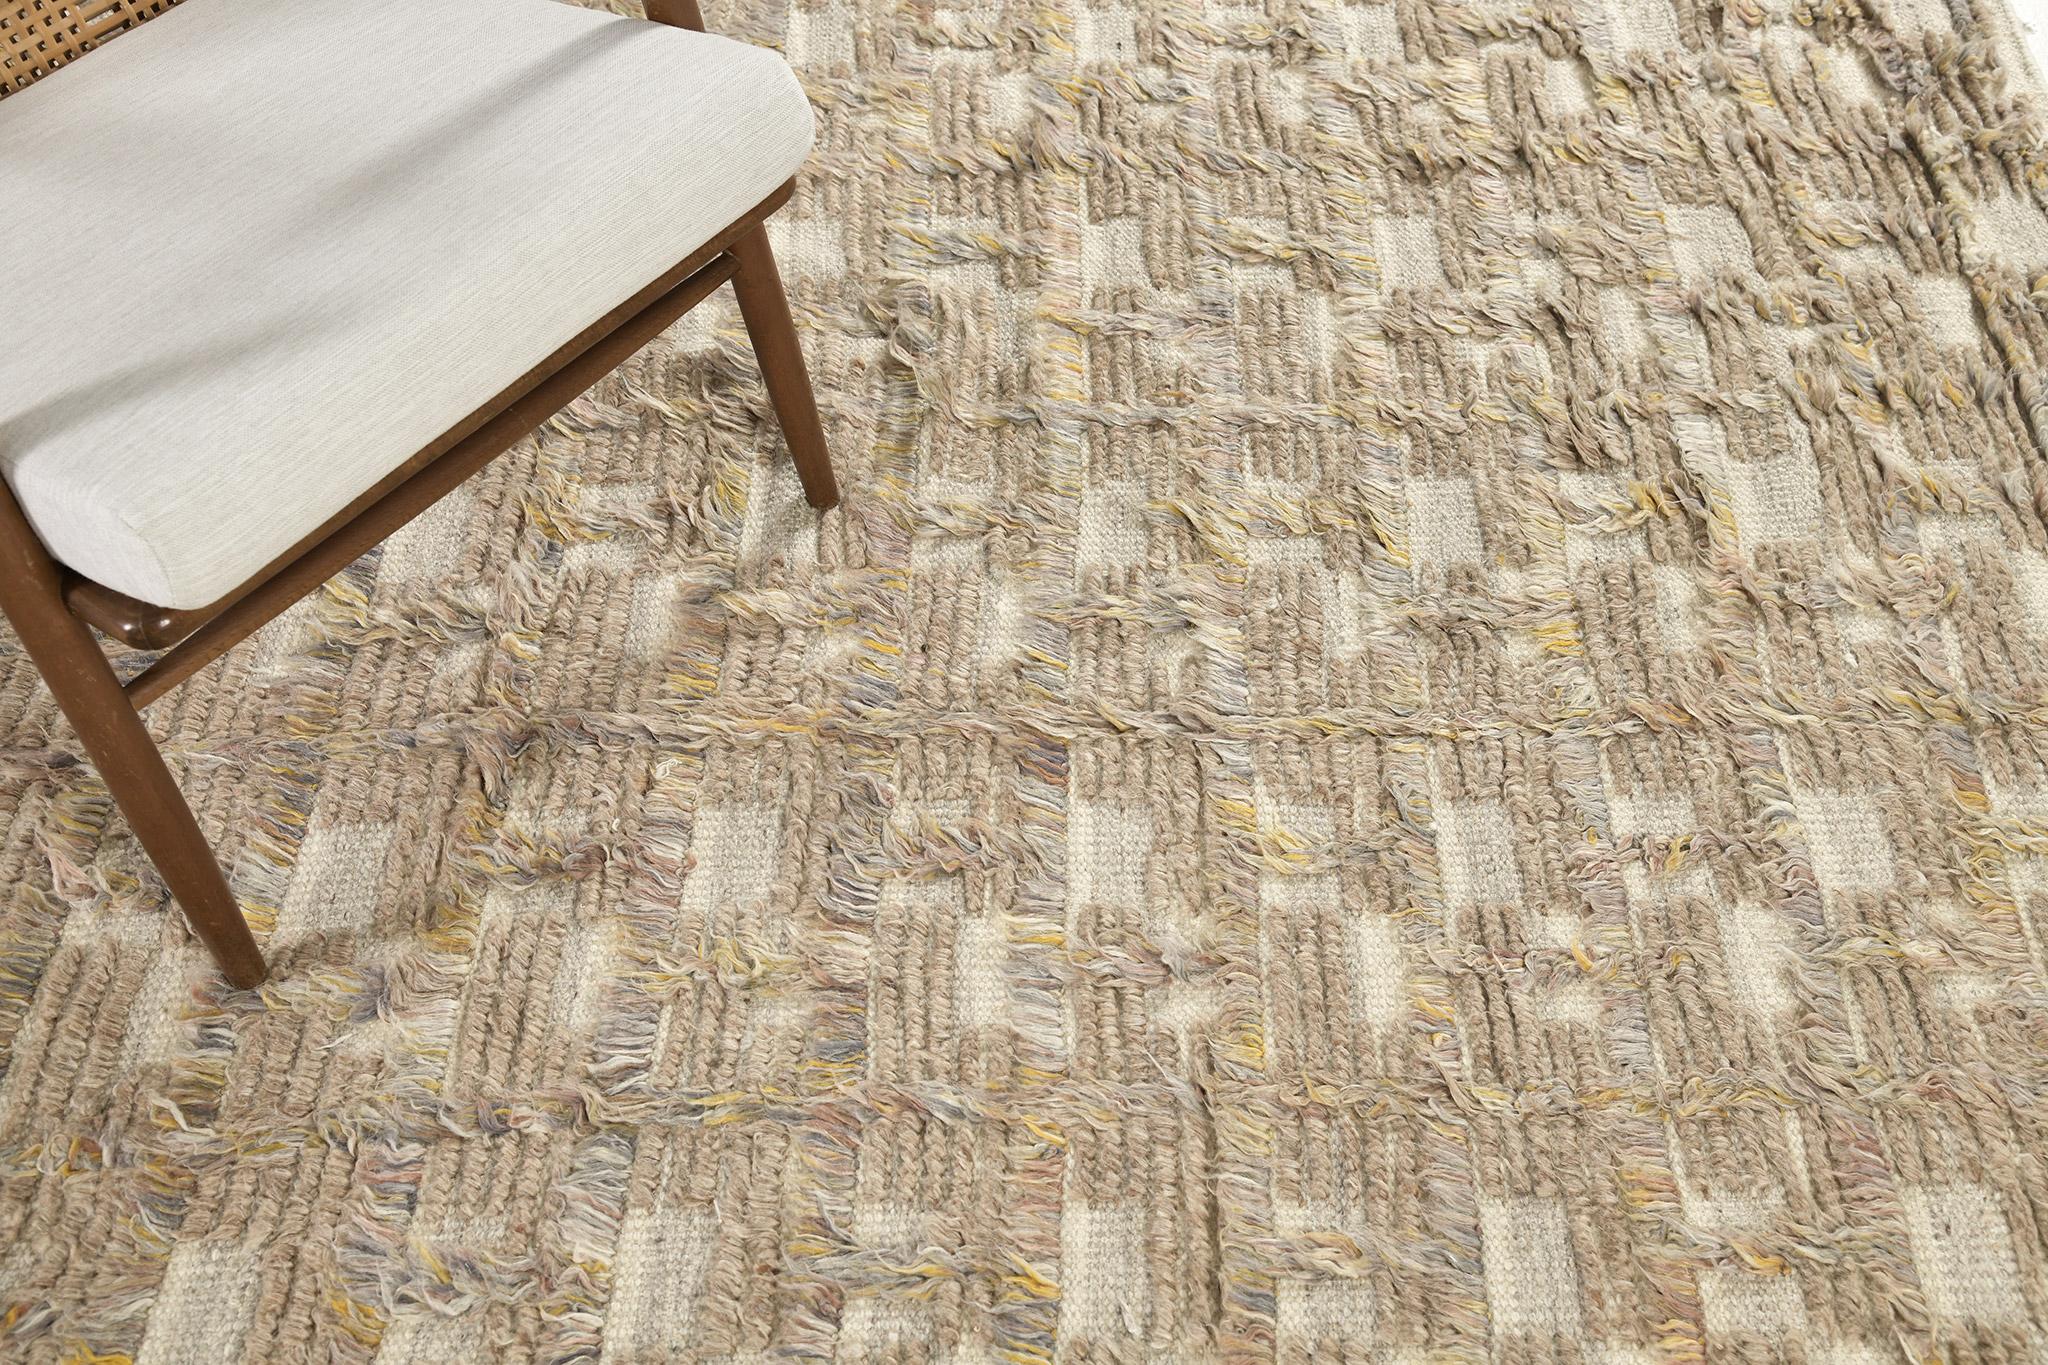 Imana is an intricate syncopated motif of long and short pile punctuated by squares of open flatweave in banded tones. Imana is available in two colorways, with custom options available. This piece features heathered clay-taupe colors, with dappled